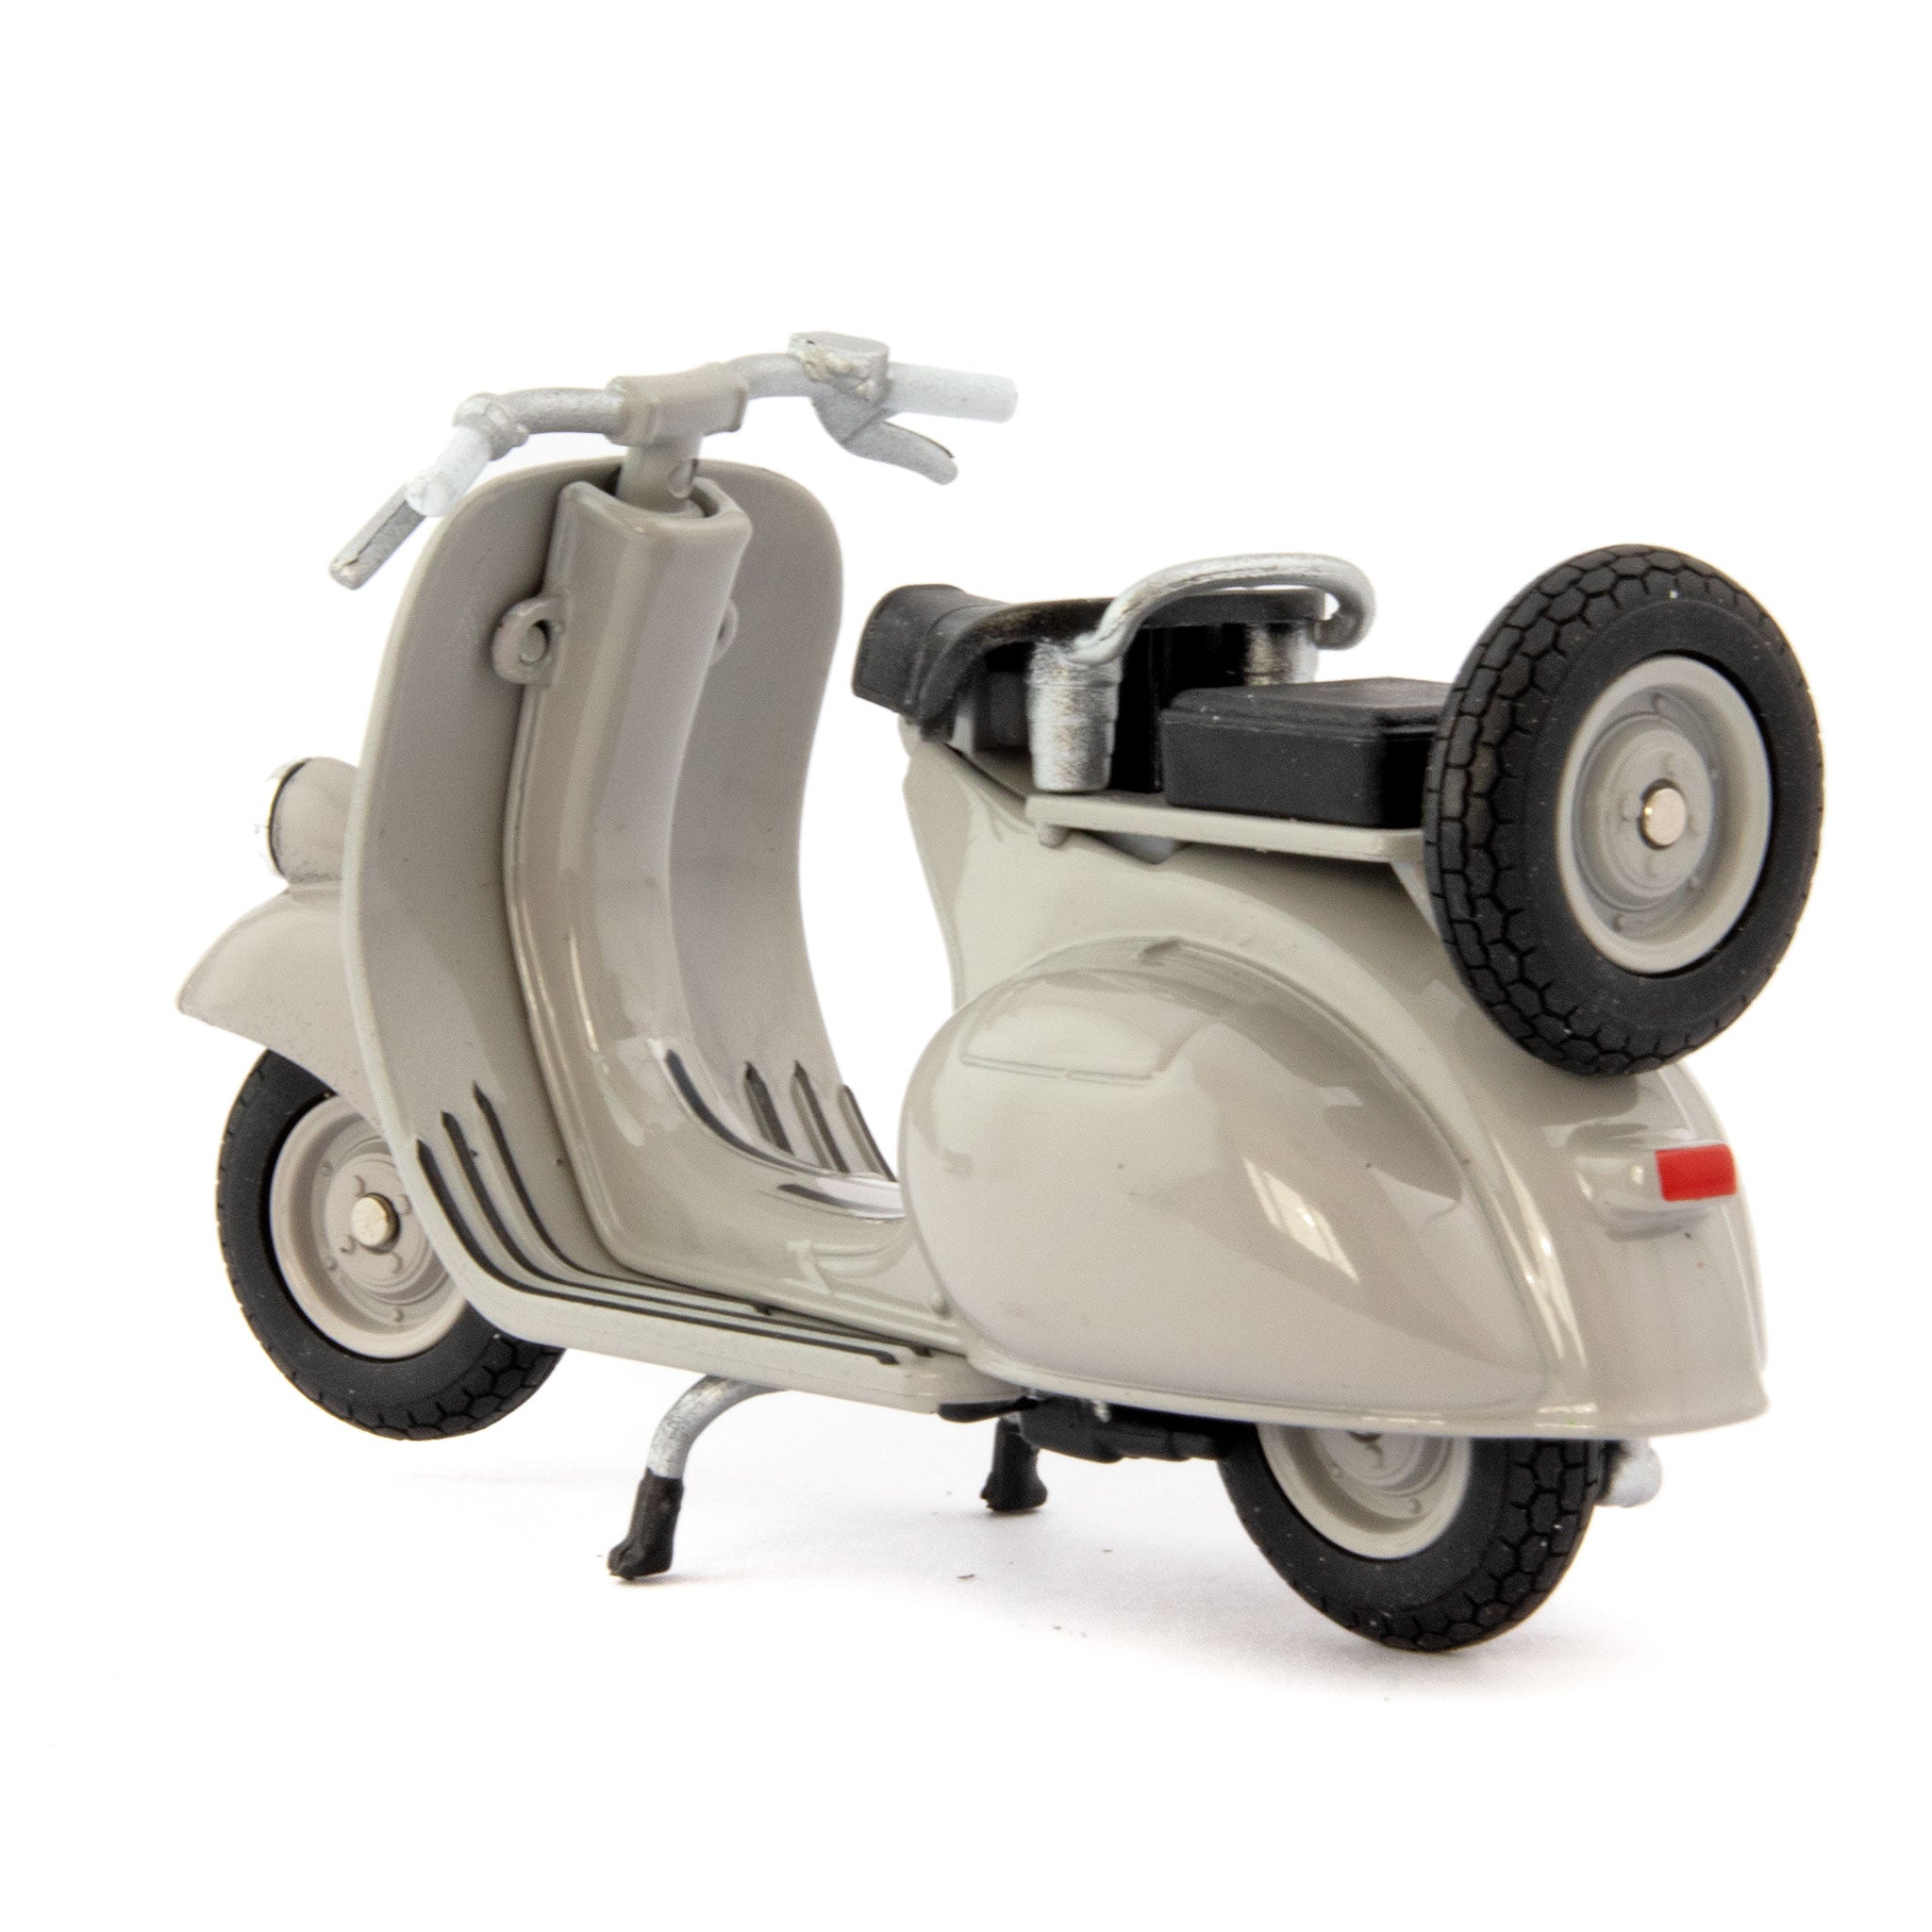 Vespa 124CC 1953 grey - 1:18 Scale Diecast Model Scooter-Welly-Diecast Model Centre